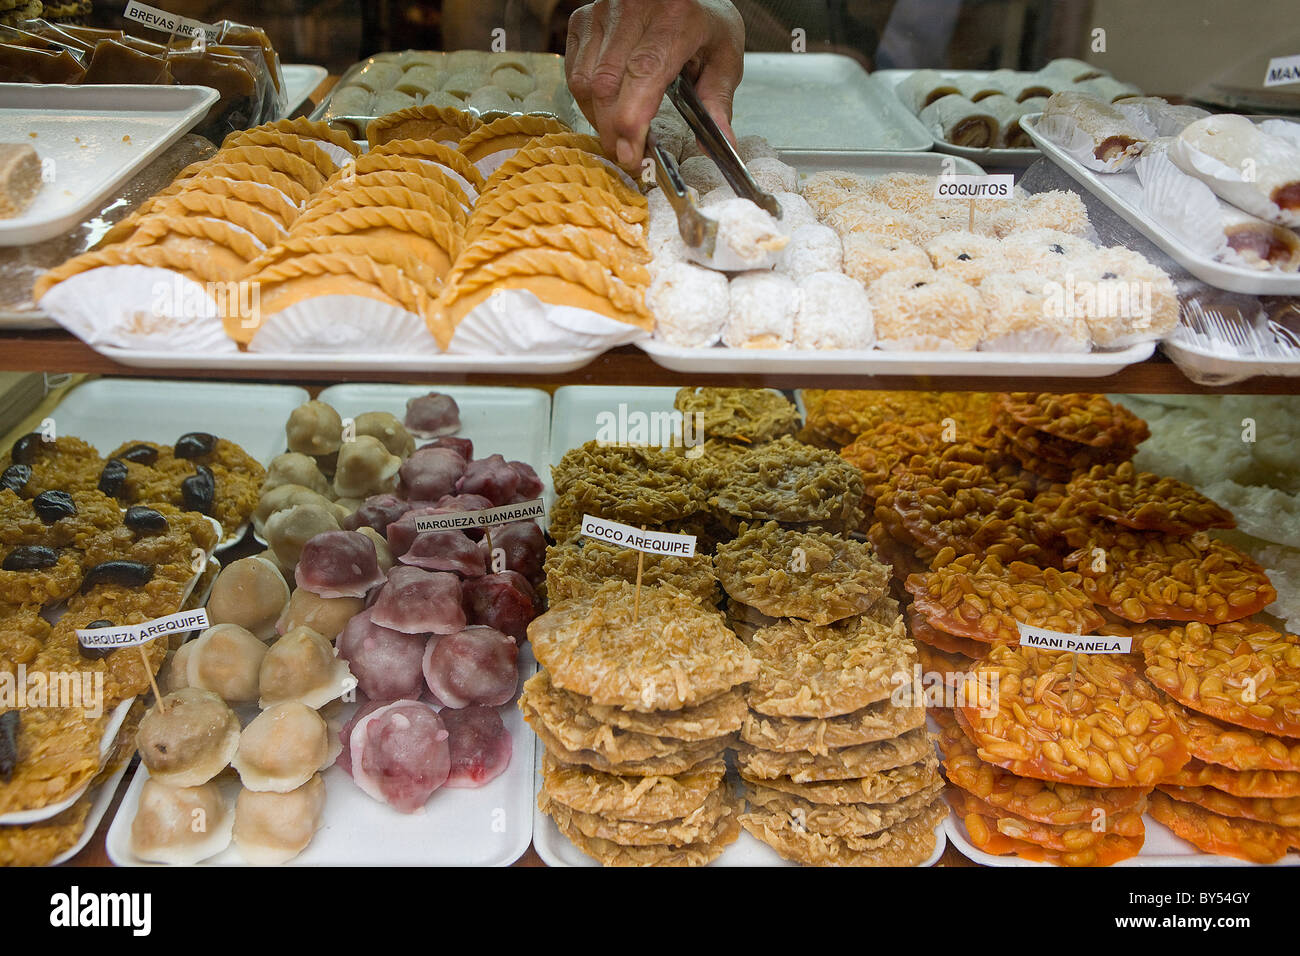 A Colombian man choosing dulces or sweets with tongs from a bakery window, Bogota, Colombia Stock Photo